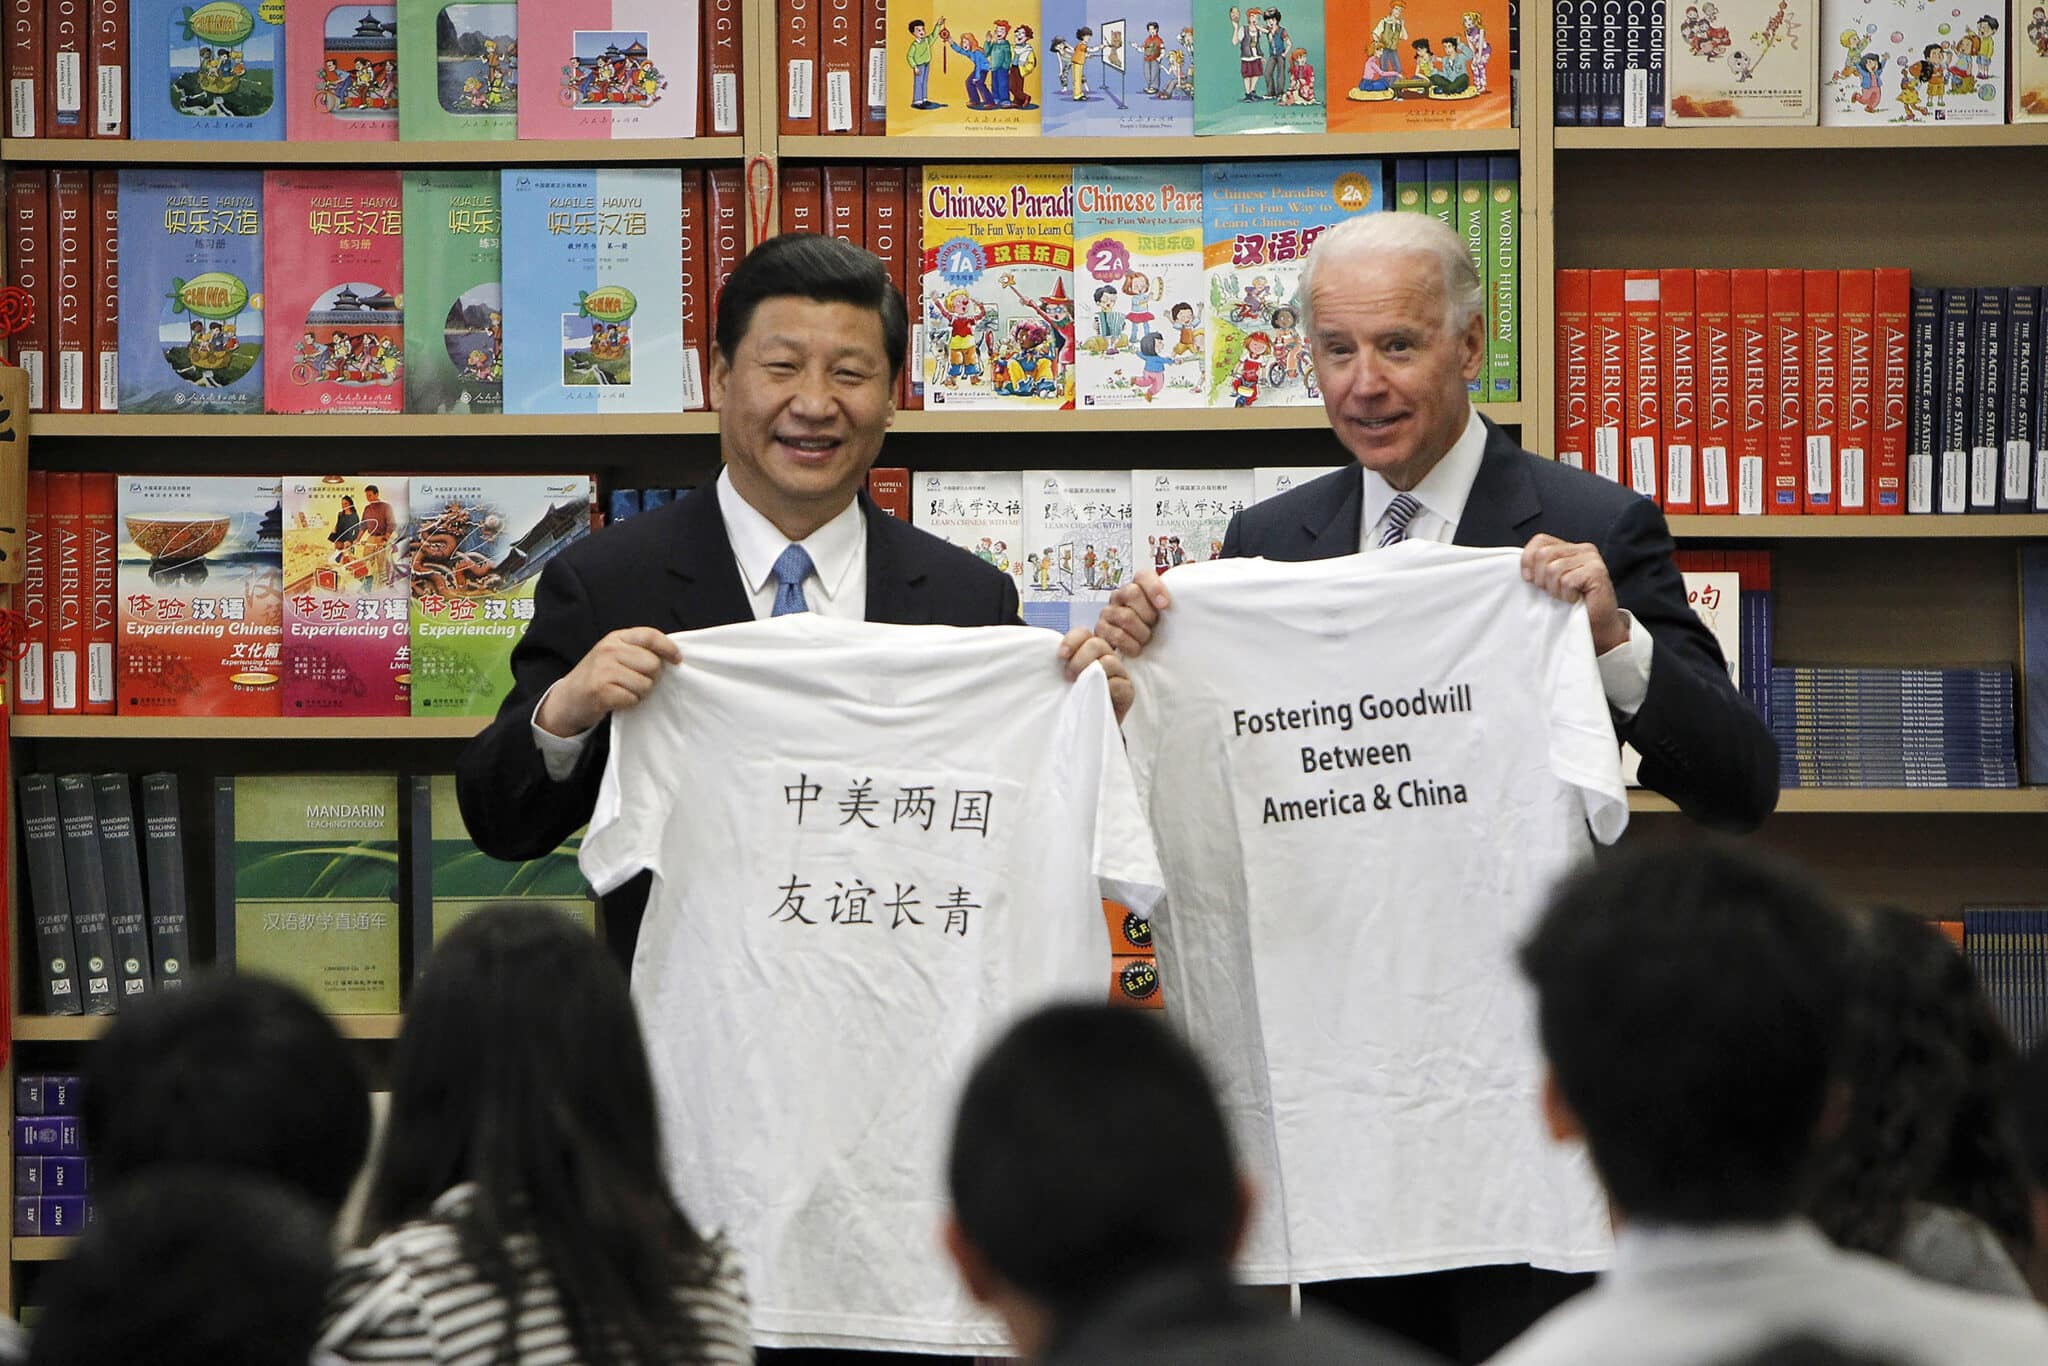 FILE - Then Chinese Vice President Xi Jinping, left, and then U.S. Vice President Joe Biden hold t-shirts given to them by students during their visit to the International Studies Learning Center in South Gate, Calif. Feb. 17, 2012. When Xi Jinping came to power in 2012, it wasn't clear what kind of leader he would be. His low-key persona during a steady rise through the ranks of the Communist Party gave no hint that he would evolve into one of modern China's most dominant leaders, or that he would put the economically and militarily ascendant country on a collision course with the U.S.-led international order. (AP Photo/Damian Dovarganes, File)